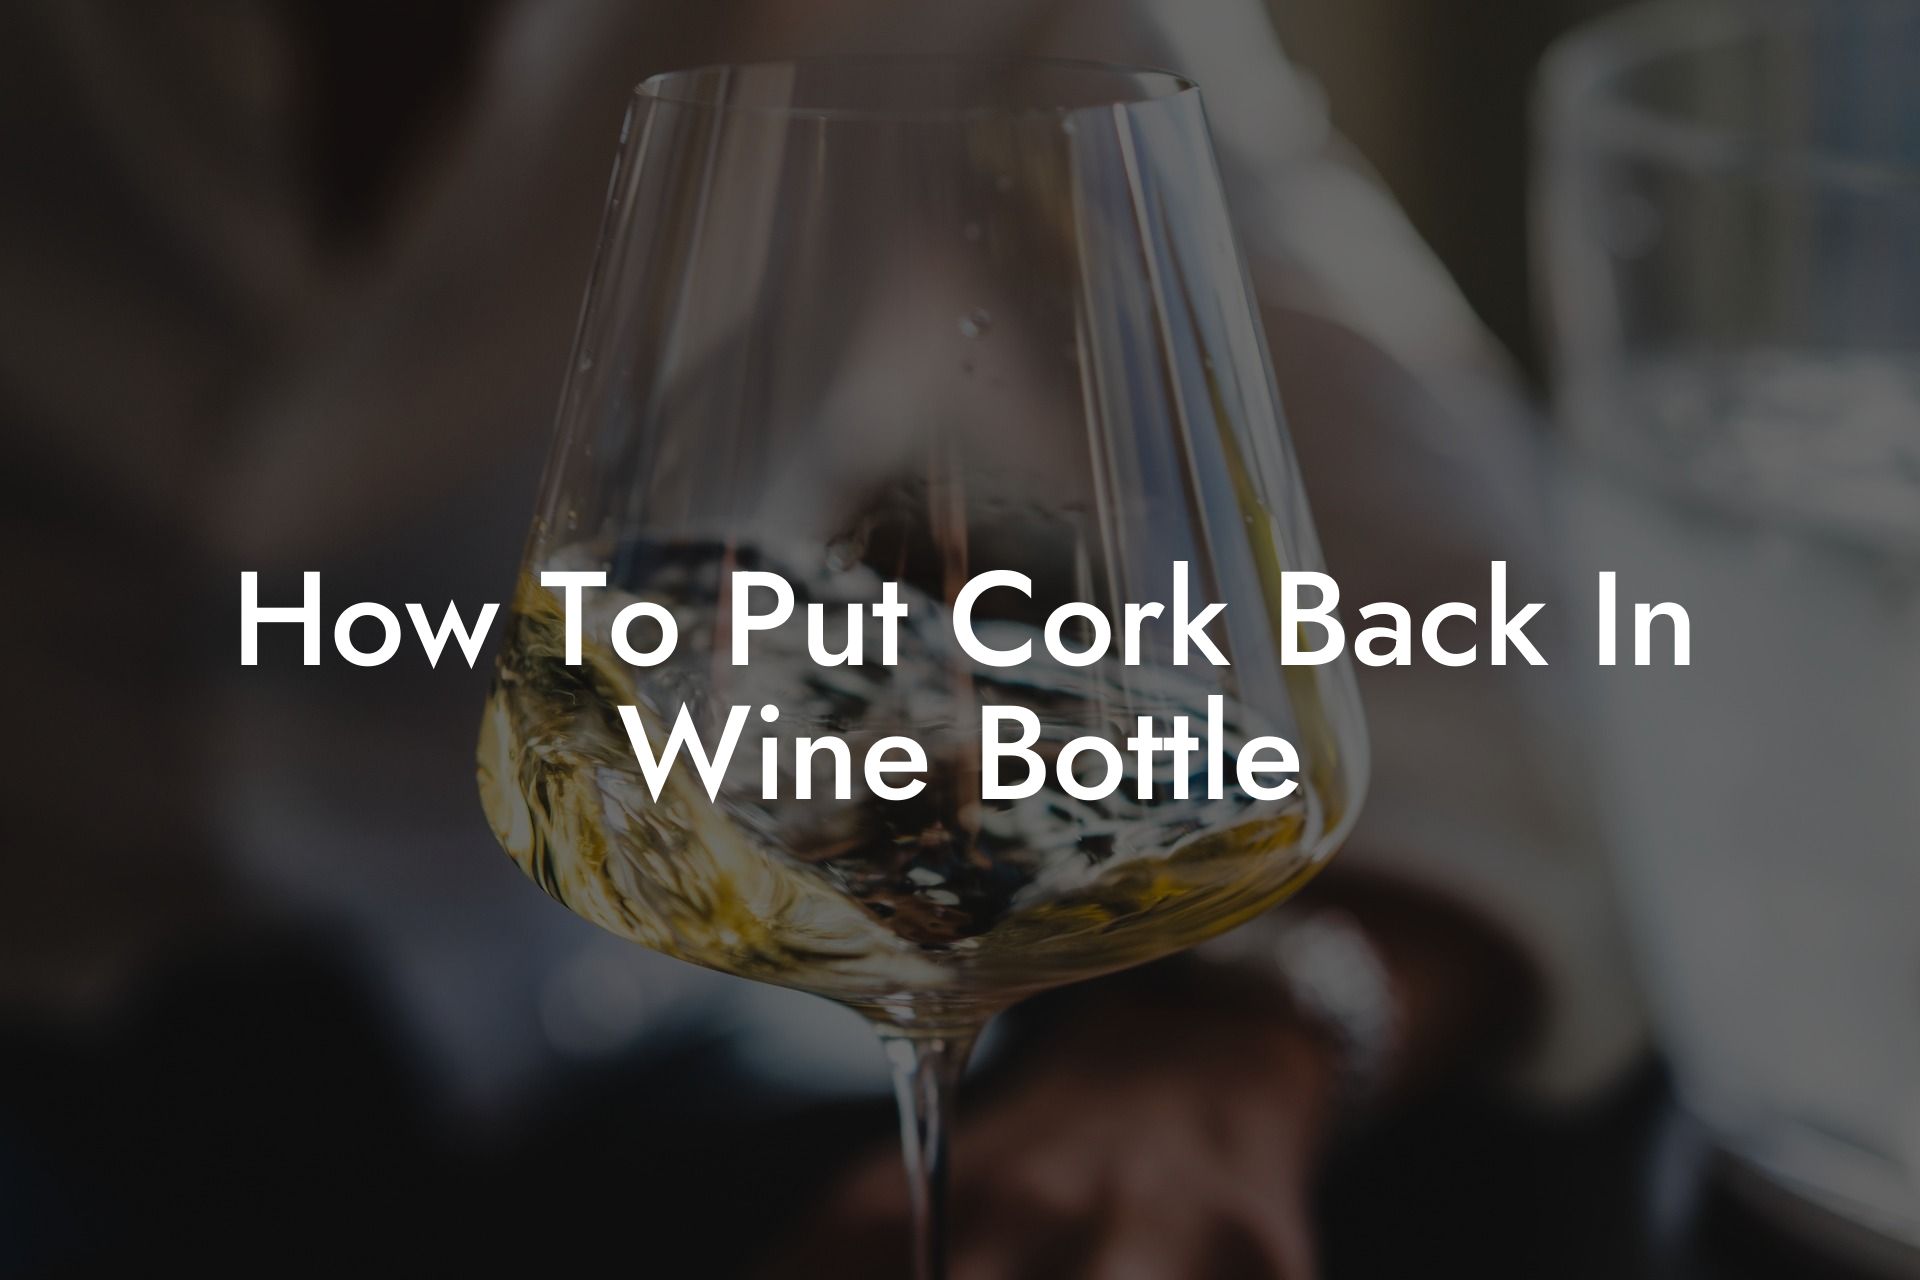 How To Put Cork Back In Wine Bottle